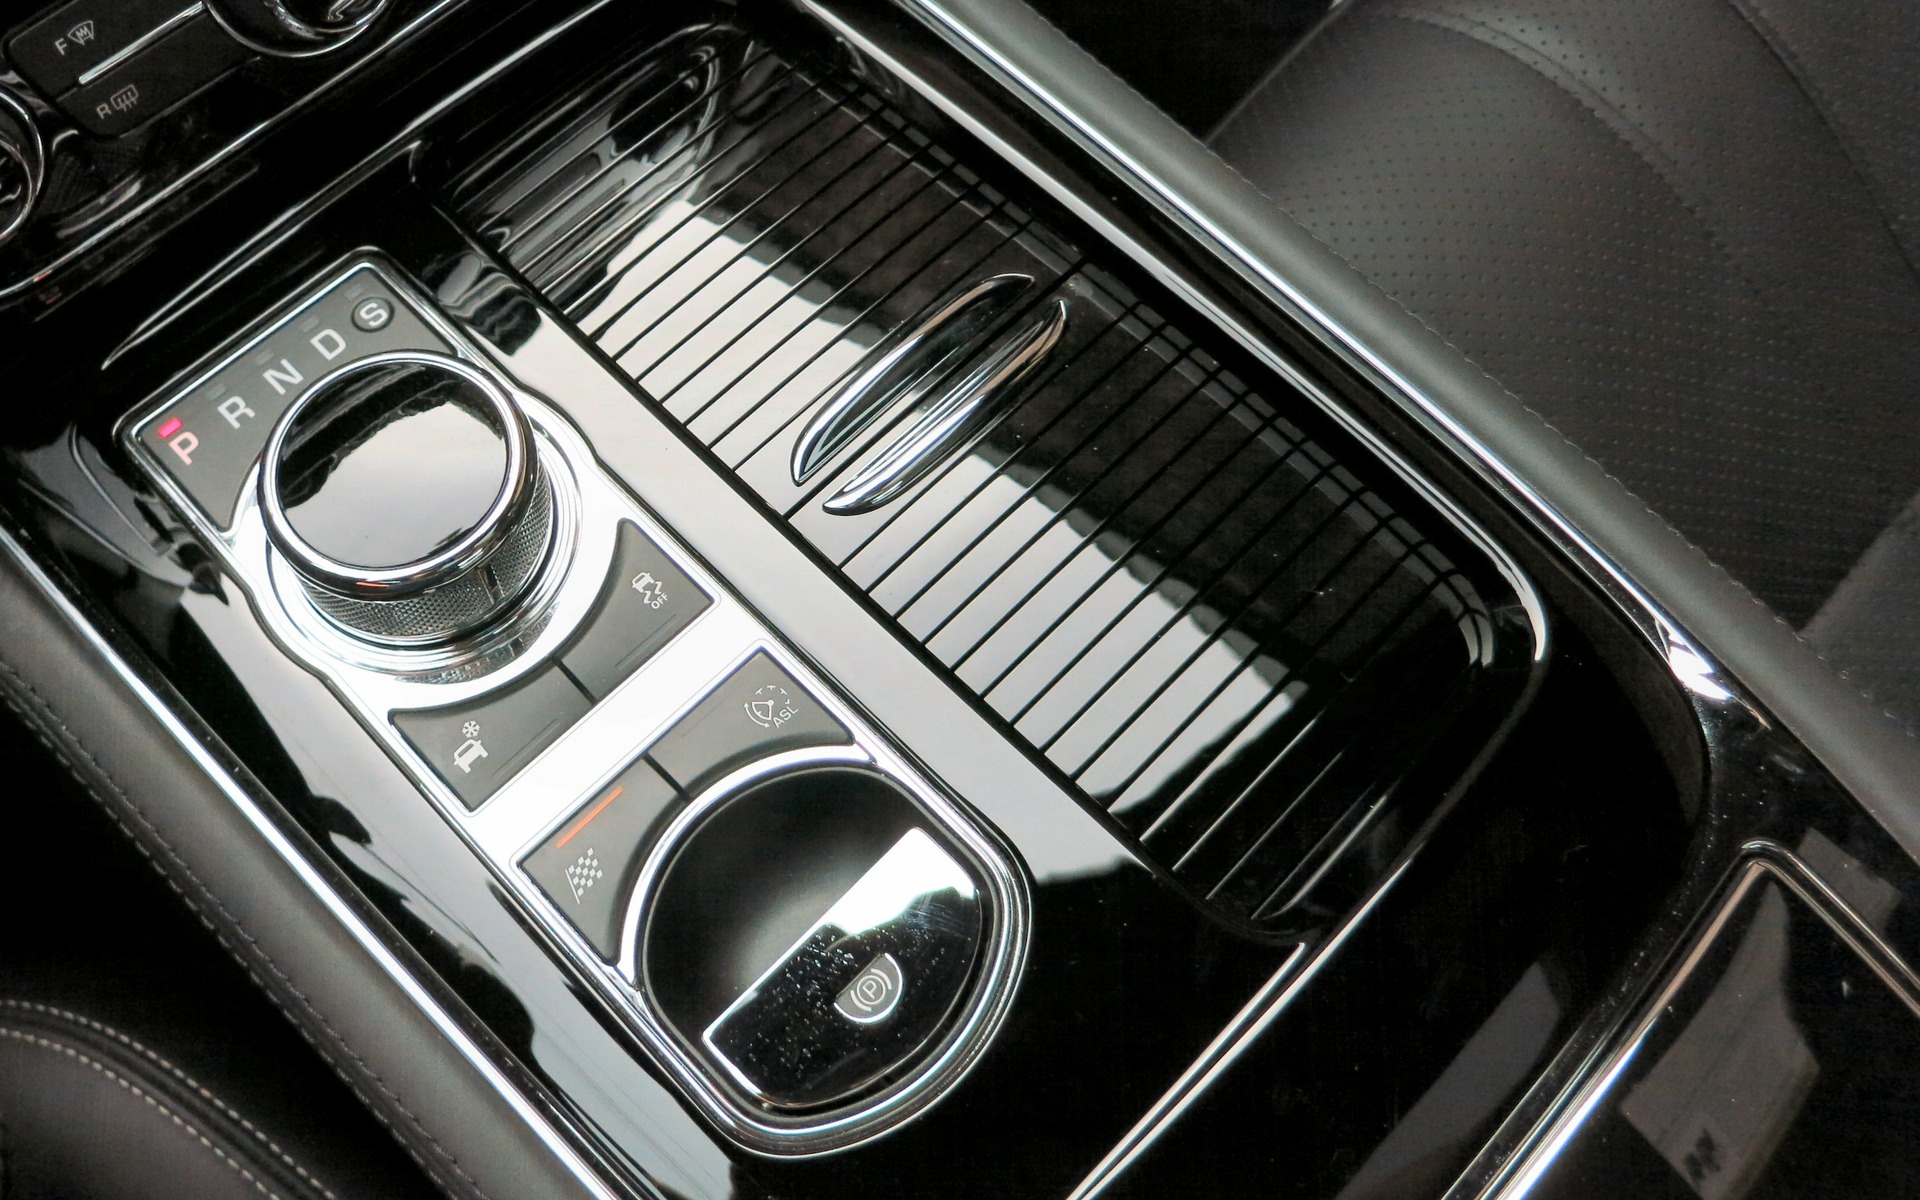 The rotary-dial shifter has become a Jaguar trademark.